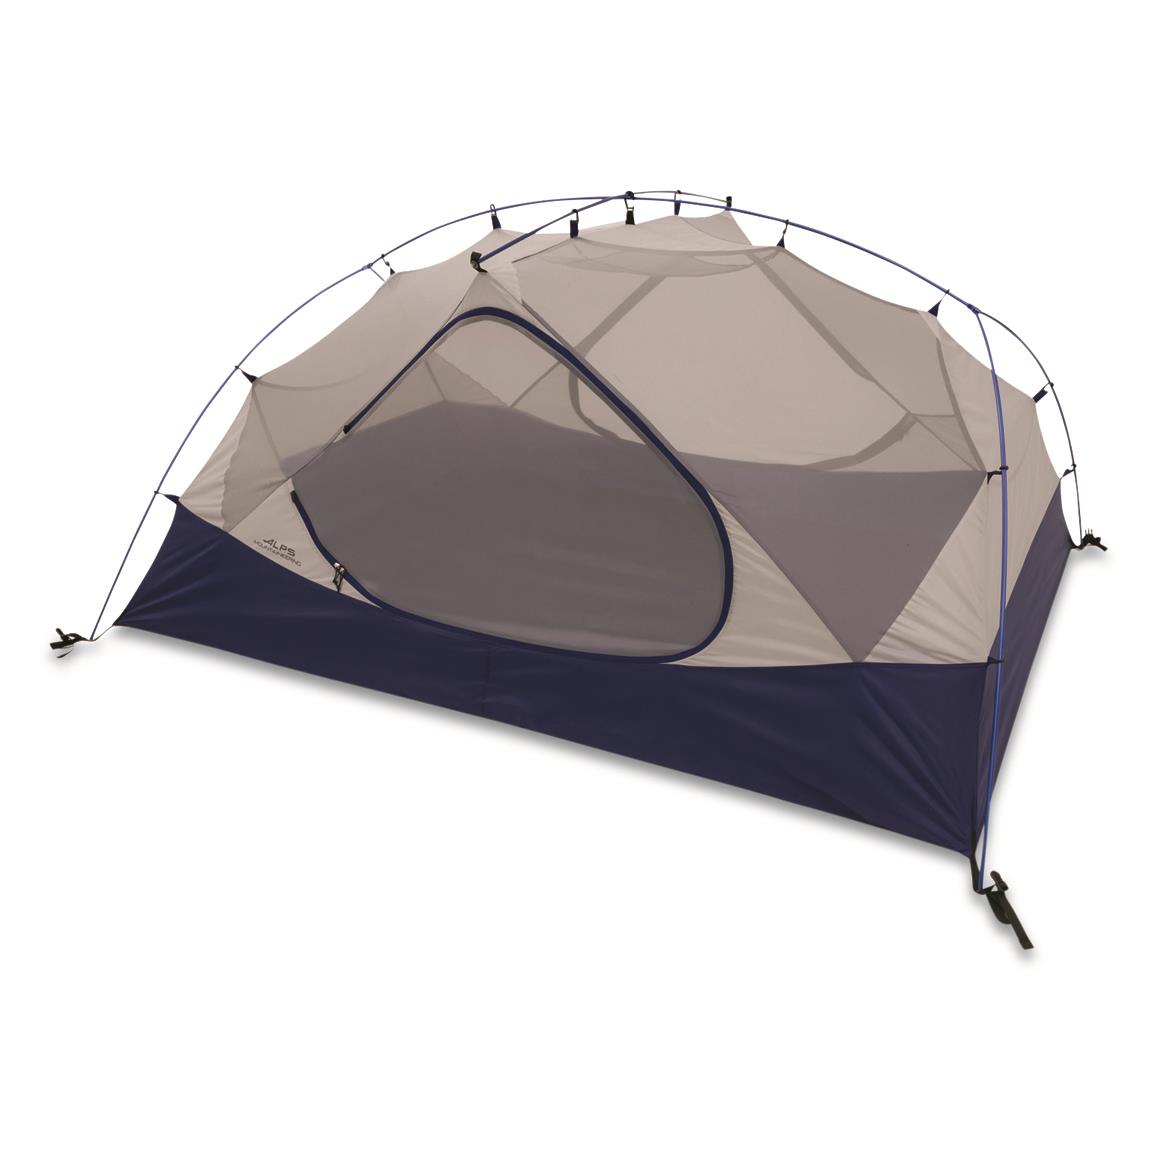 ALPS Mountaineering Chaos Tent, 2-Person, Gray/Navy